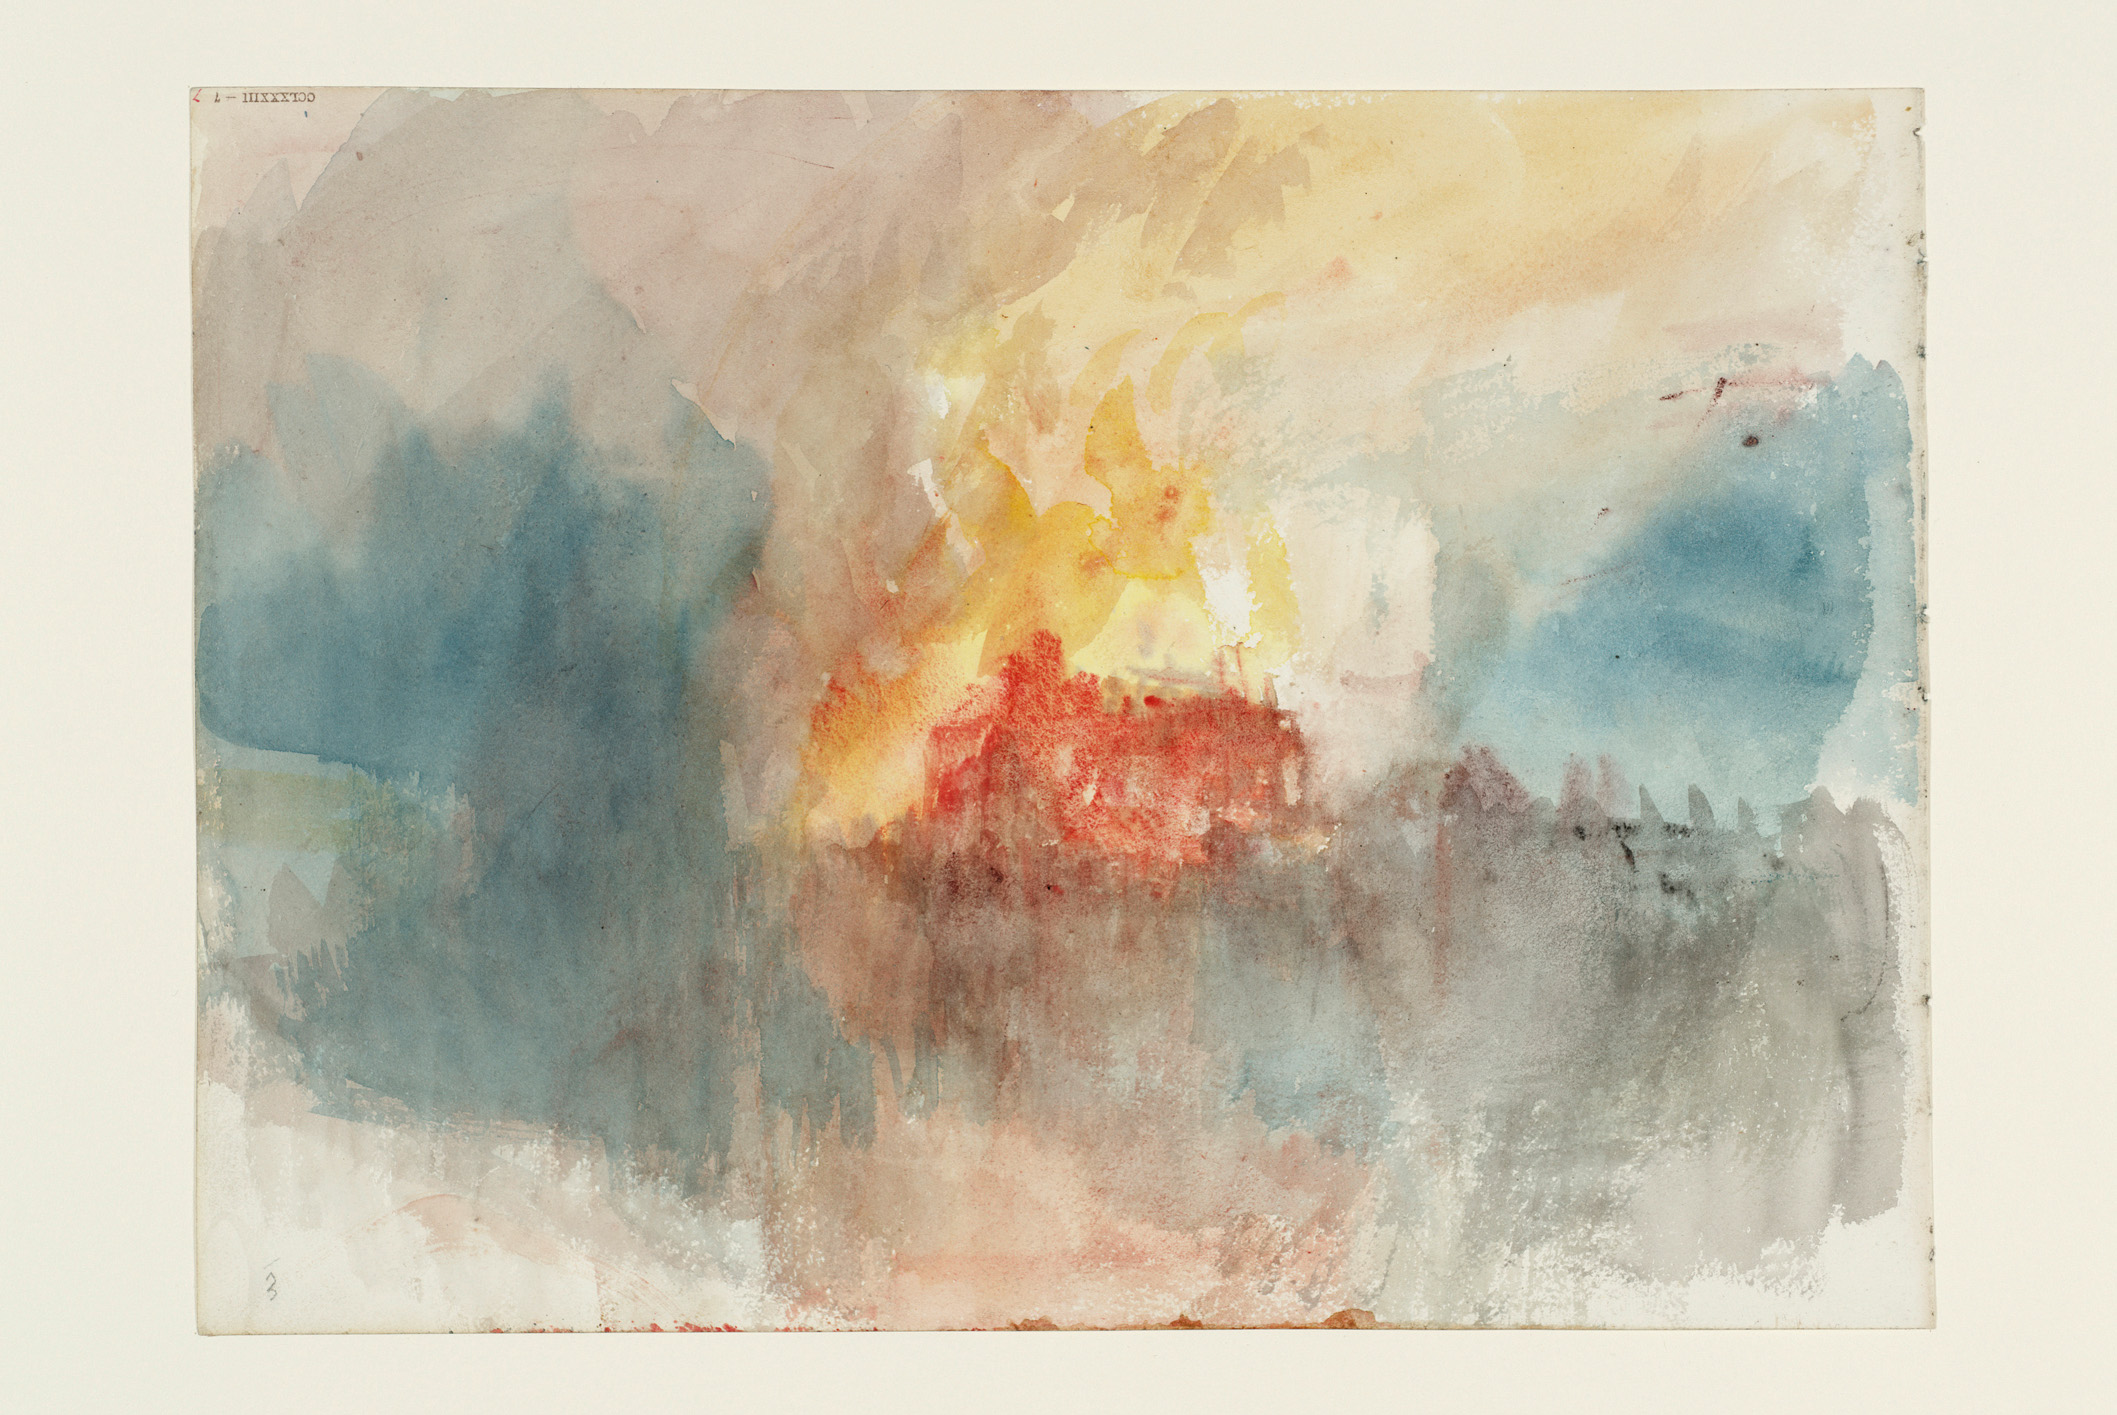 Fire at the Grand Storehouse of the Tower of London by Joseph Mallord William Turner - 1841 - 23.5 × 32.5 cm Kunsthistorisches Museum